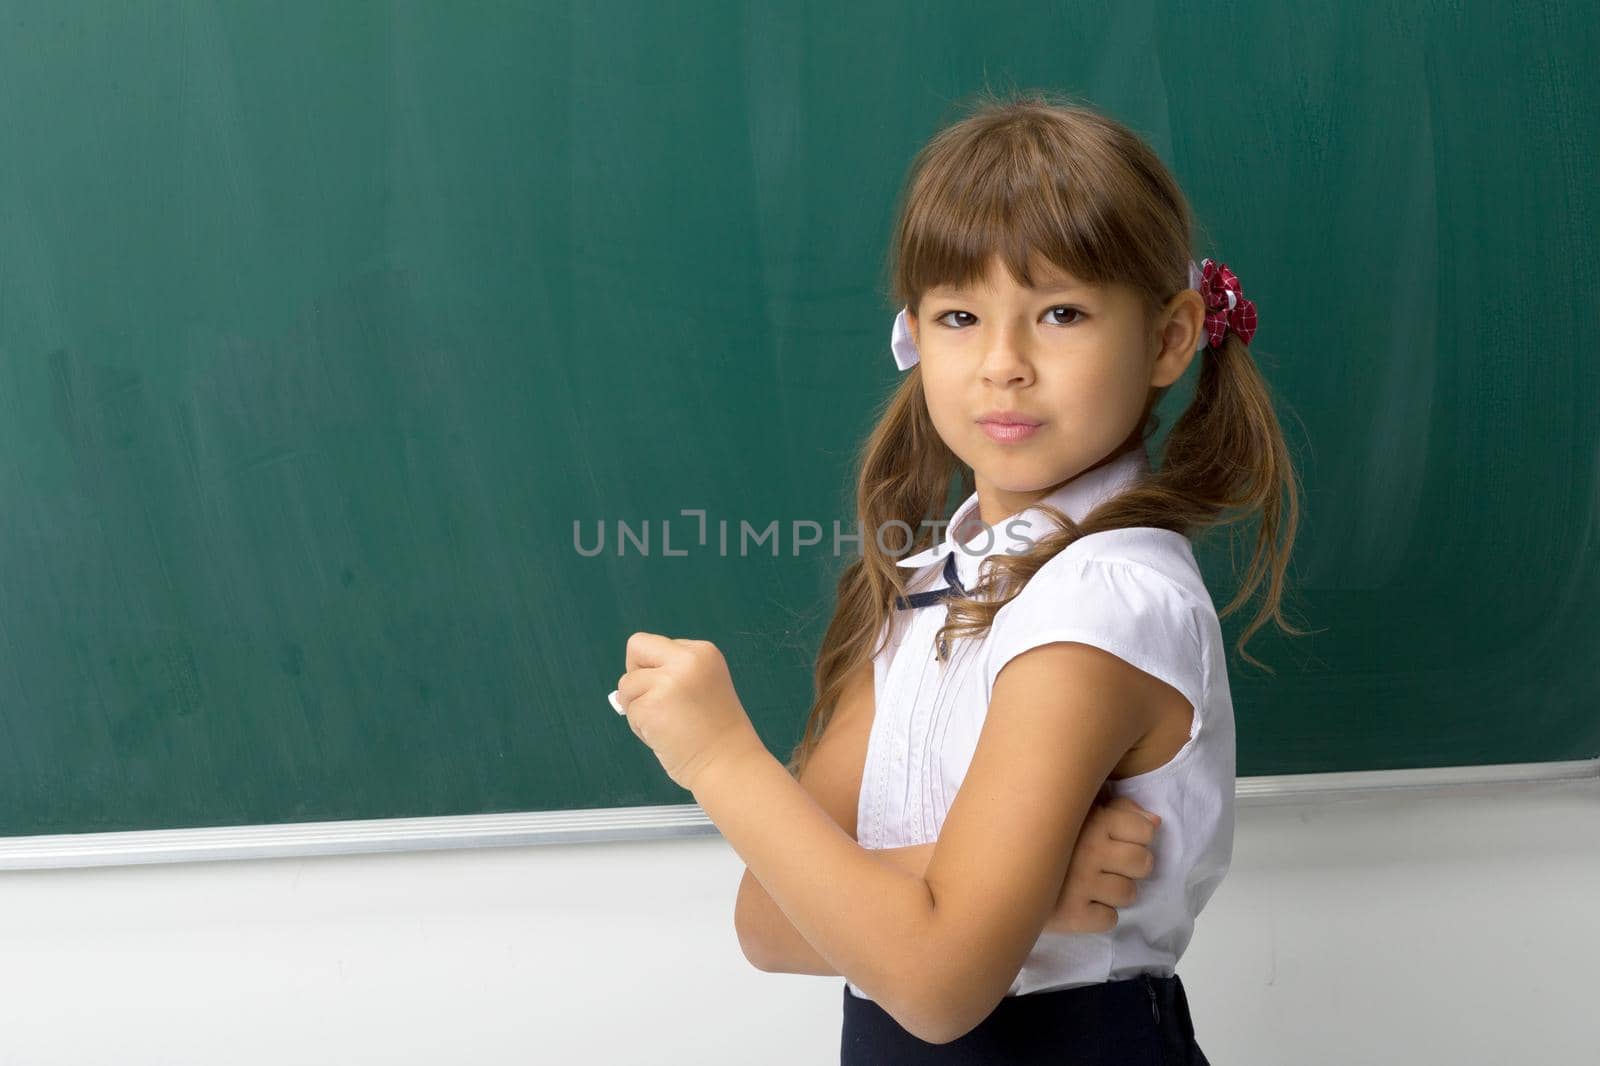 Pretty girl posing at blackboard. Portrait of beautiful schoolgirl in school uniform standing at green chalkboard with piece of chalk in her hand and looking at camera. School and education concept